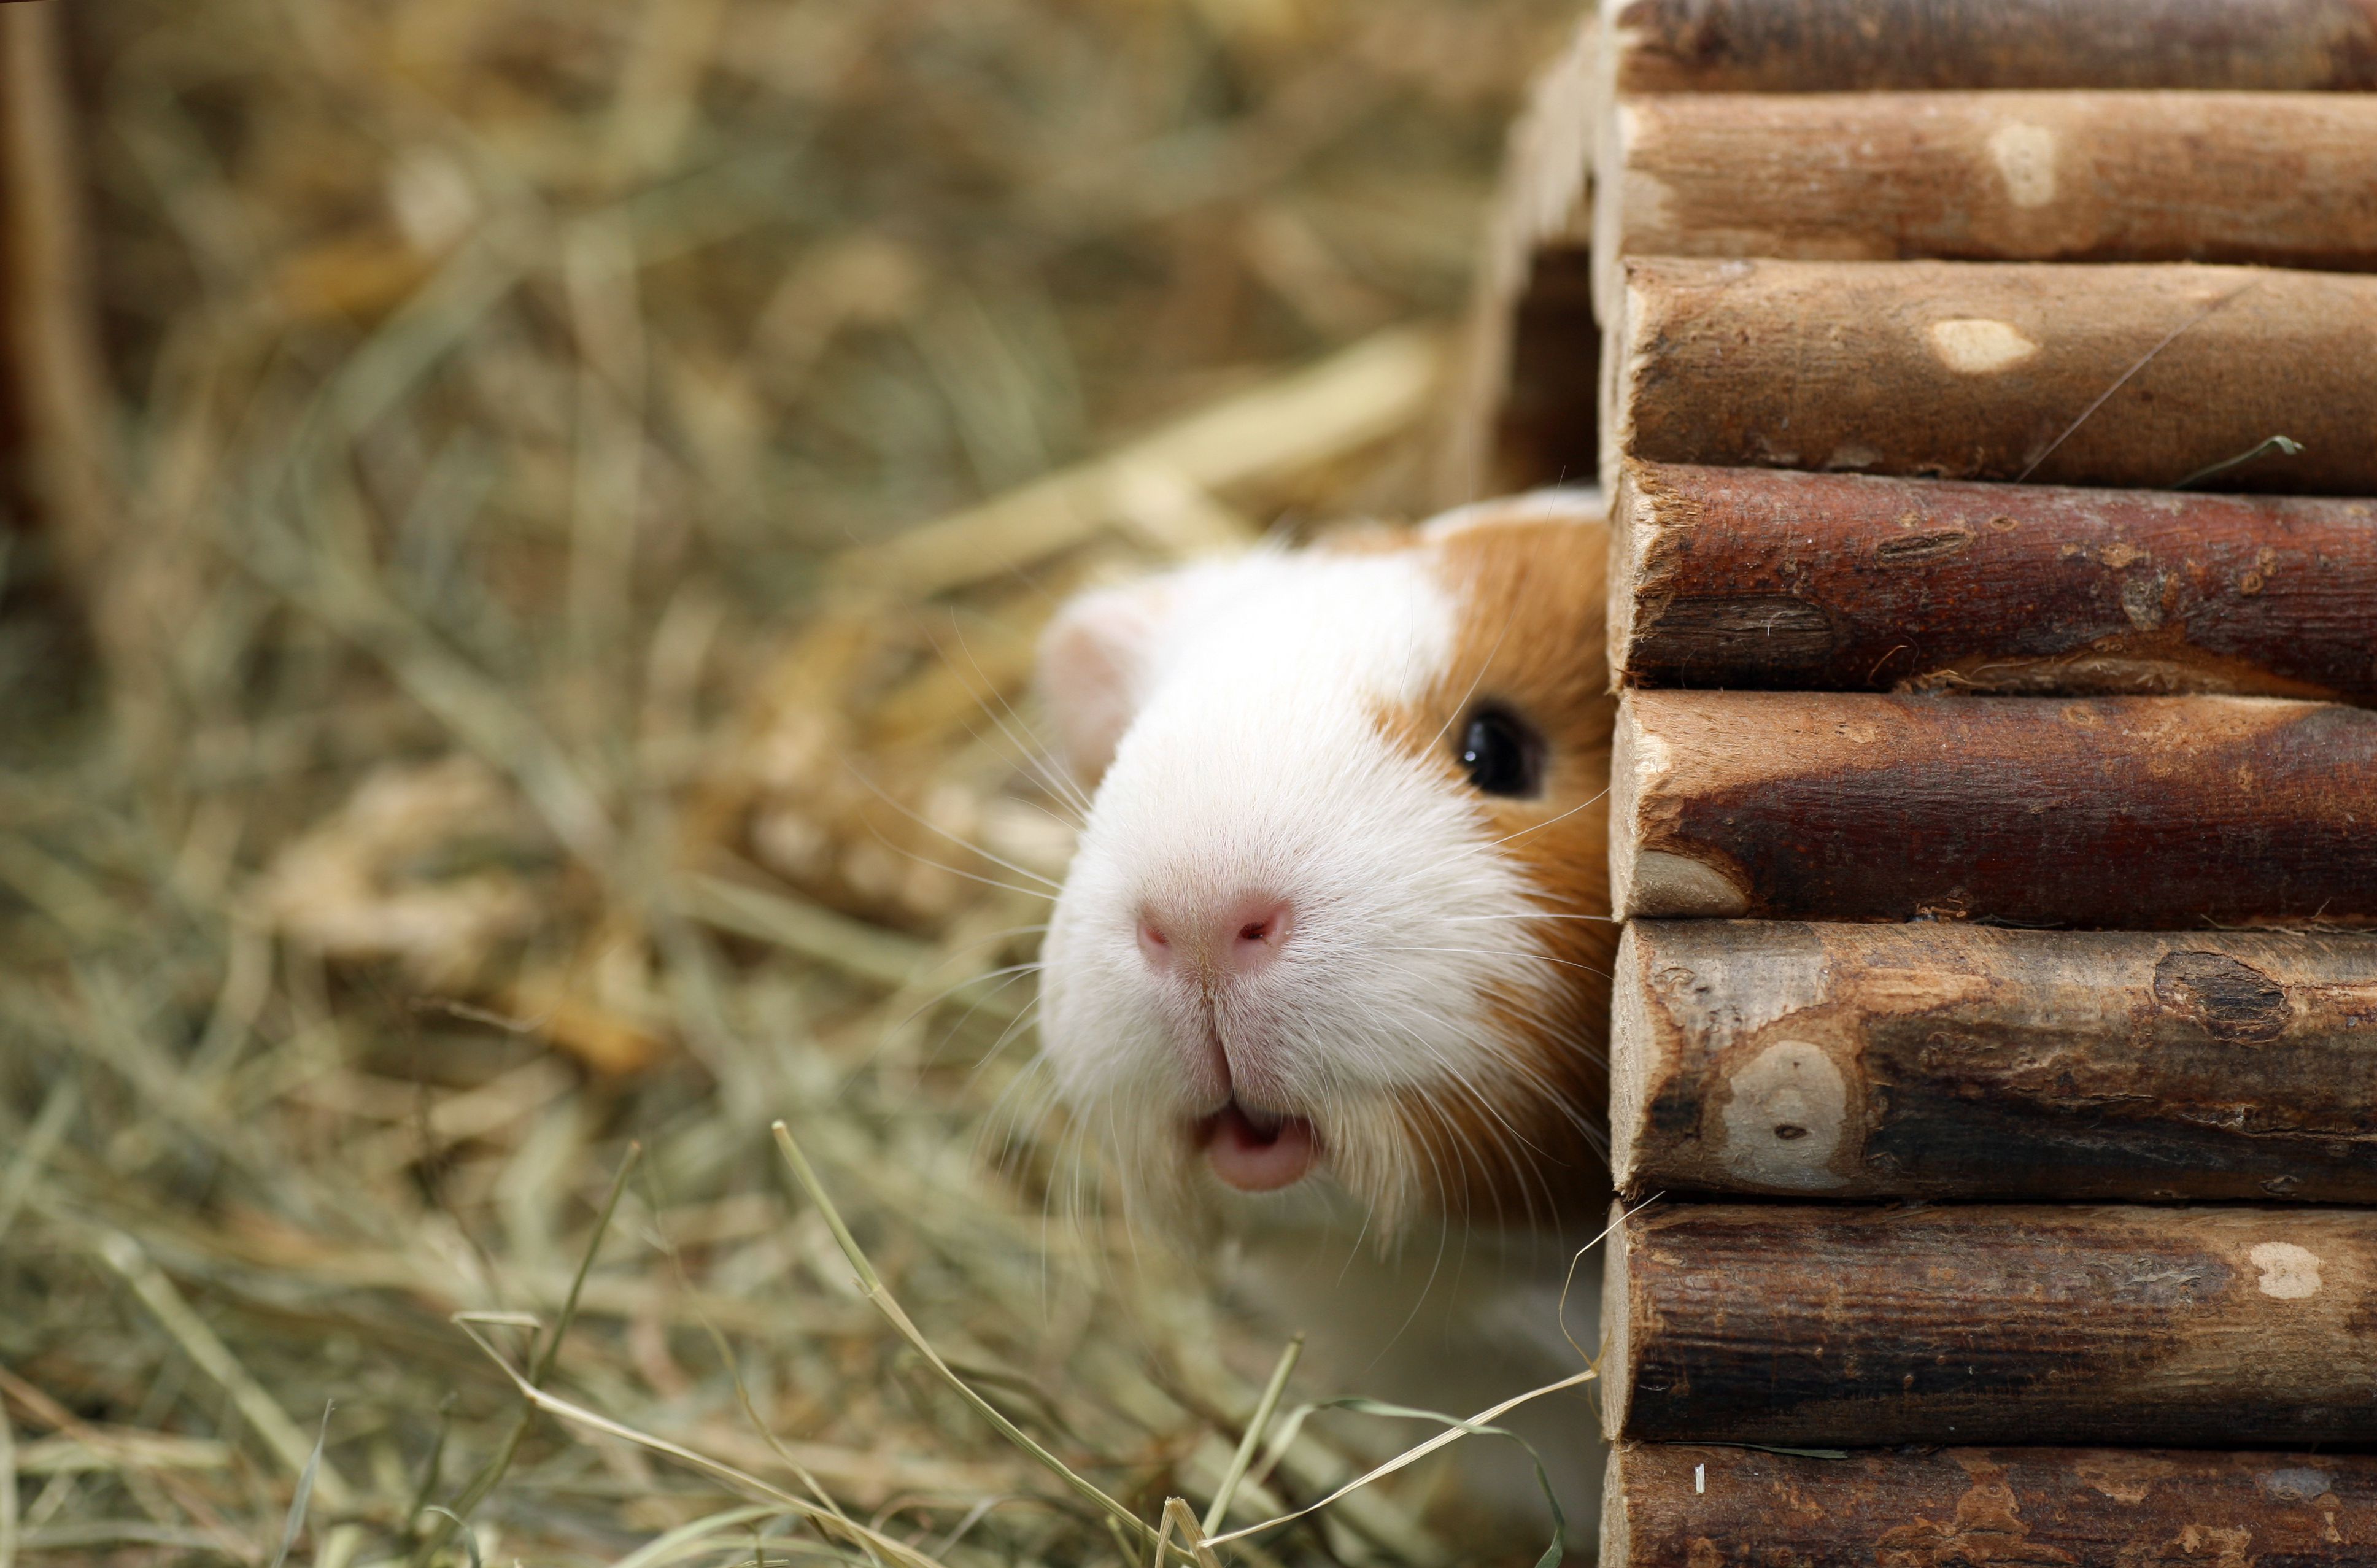 Guinea pig peeking out of his hut